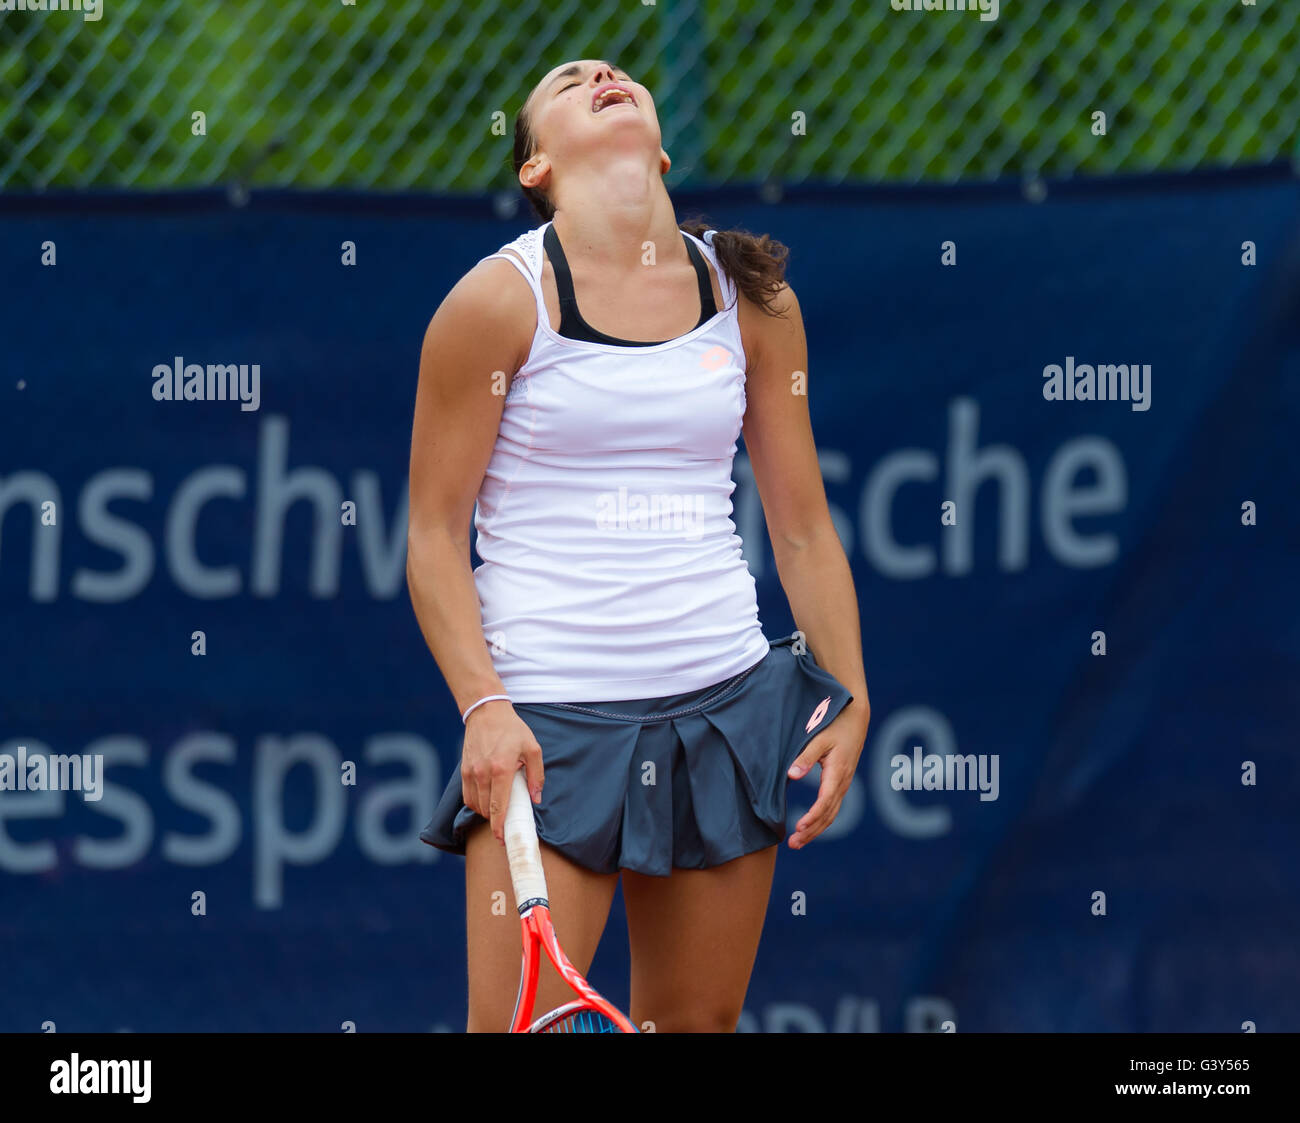 Braunschweig, Germany. 16 June, 2016. Cristiana Ferrando in action at the  2016 Braunschweig Womens Open ITF Pro Circuit $25,000 tennis tournament.  Credit: Jimmie48 Photography/Alamy Live News Stock Photo - Alamy